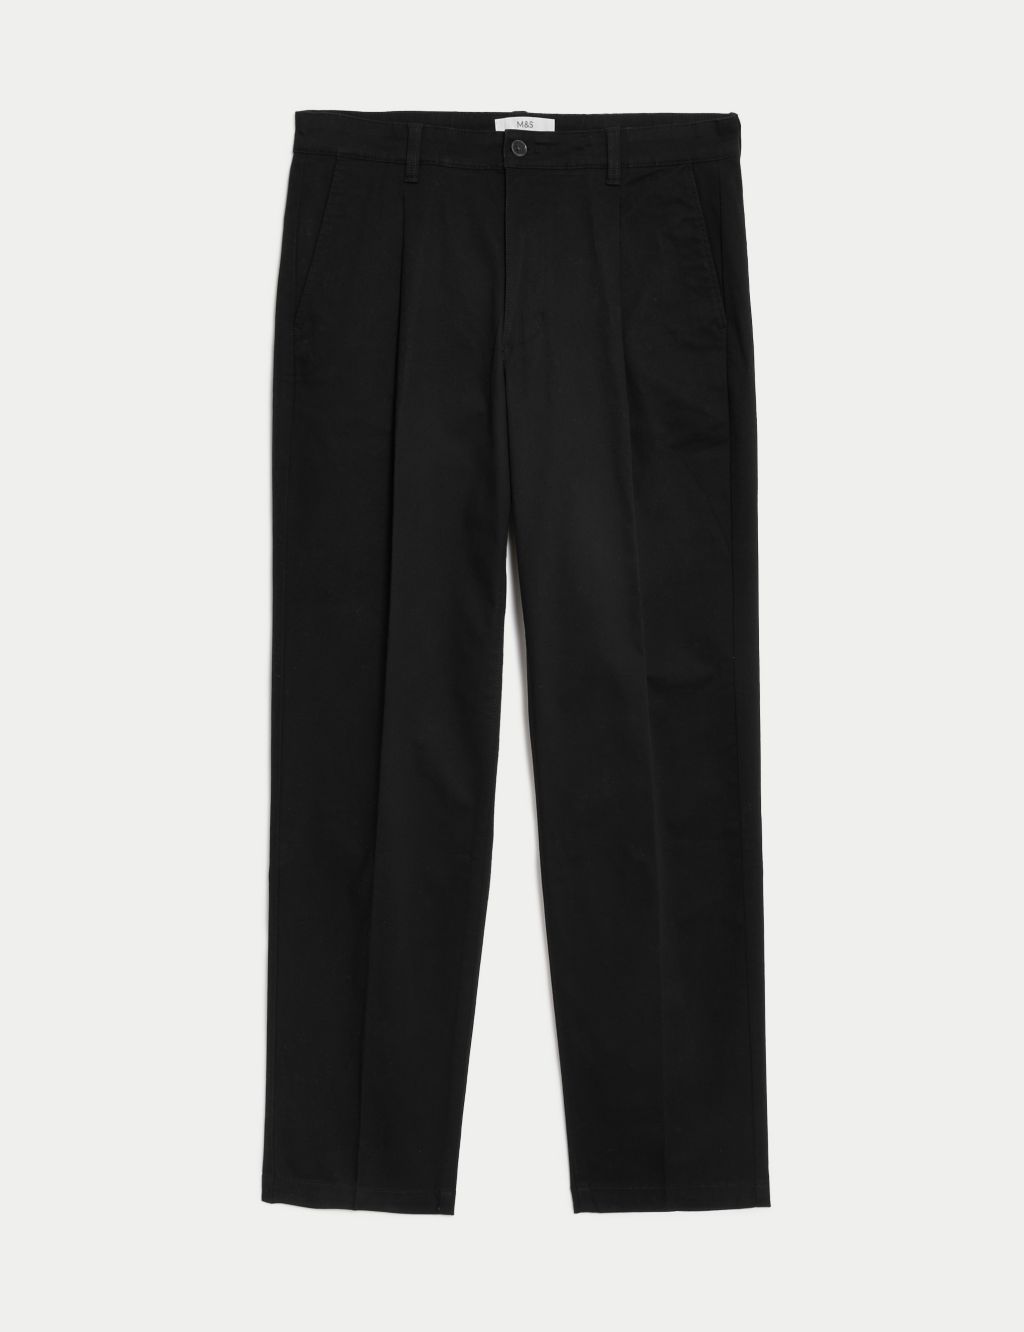 Regular Fit Single Pleat Stretch Chinos | M&S Collection | M&S